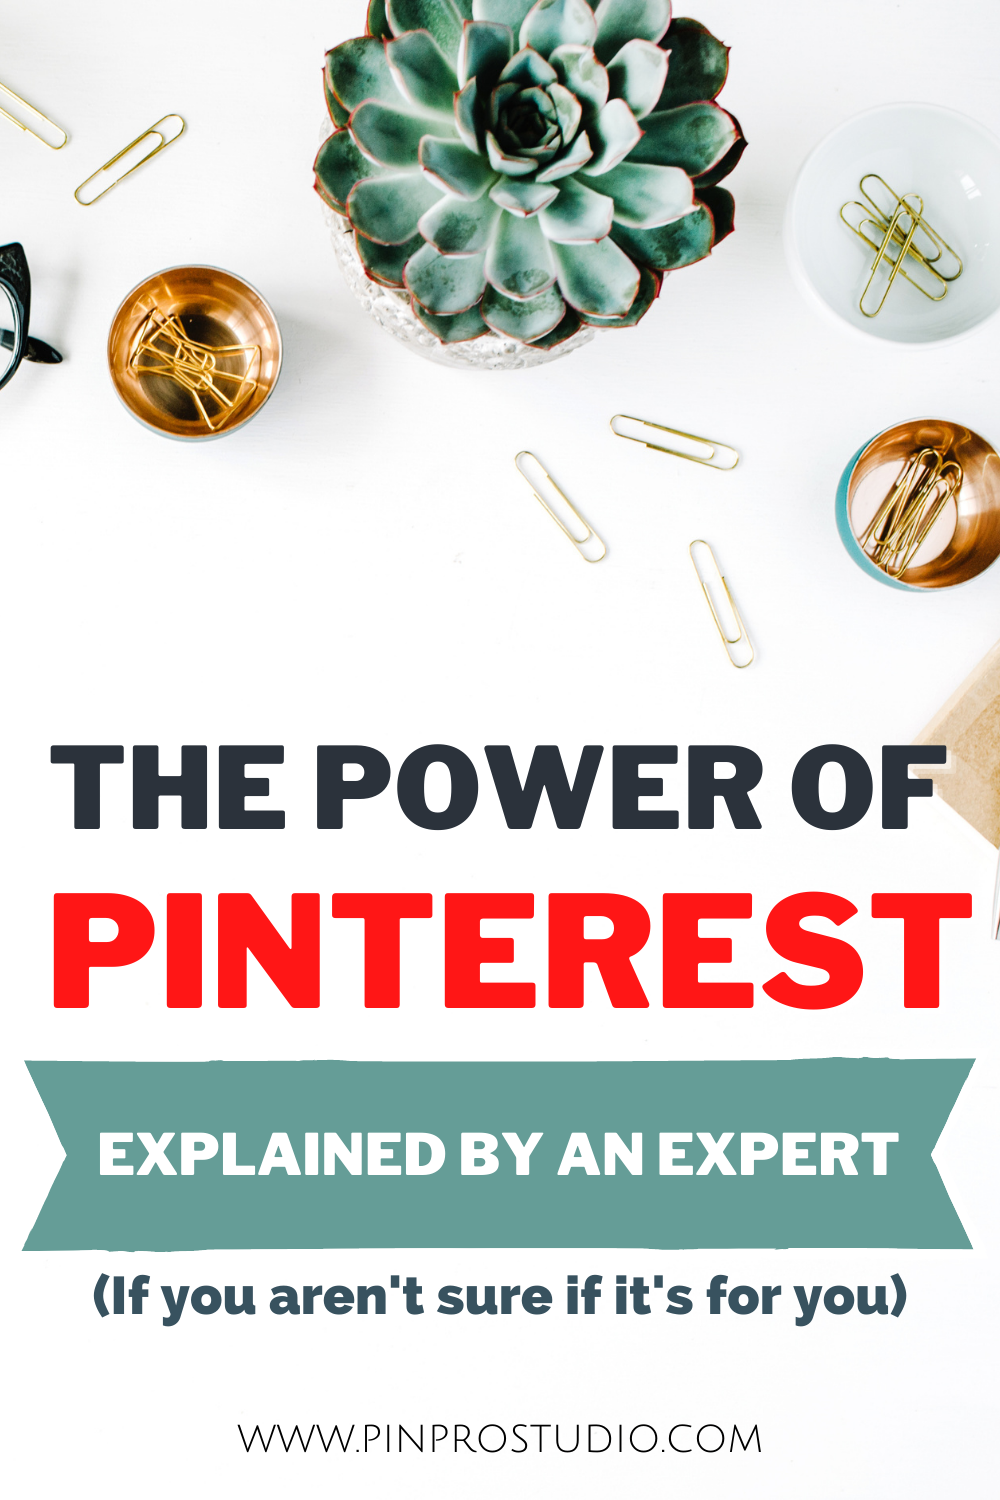 Pinterest Pin Image "The Power of Pinterest Explained by an Expert"